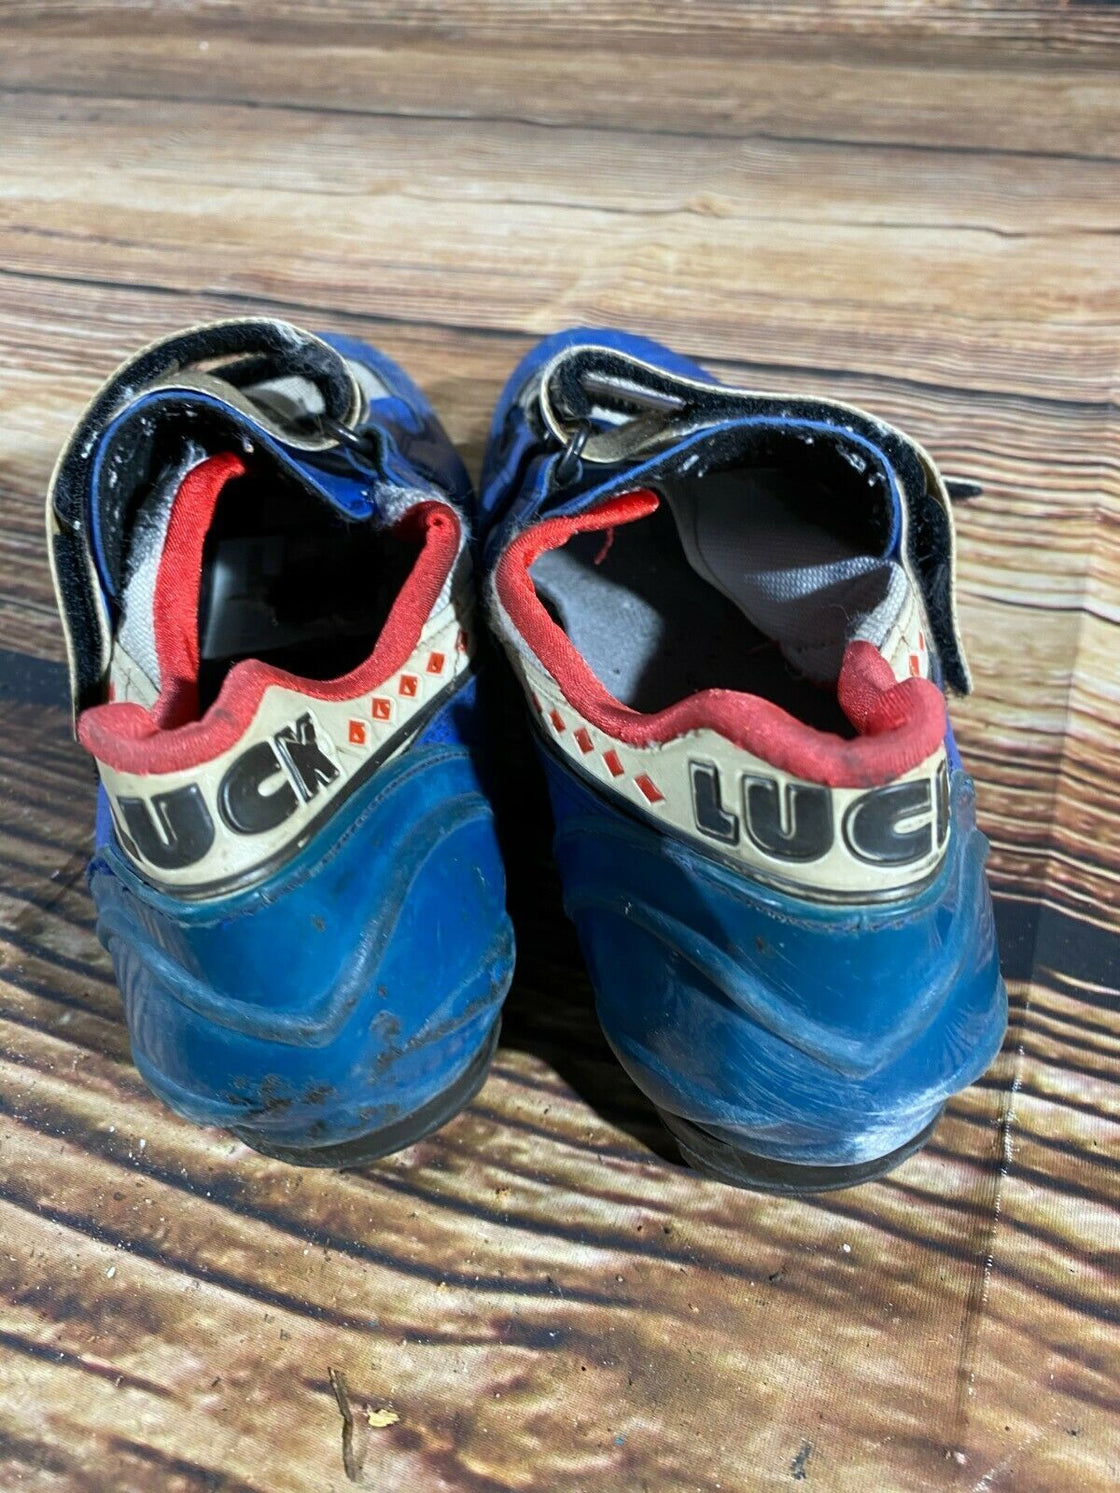 LUCK Fly Cycling Shoes Vintage MTB Mountain Biking Boots Size EU42 US9 SPD